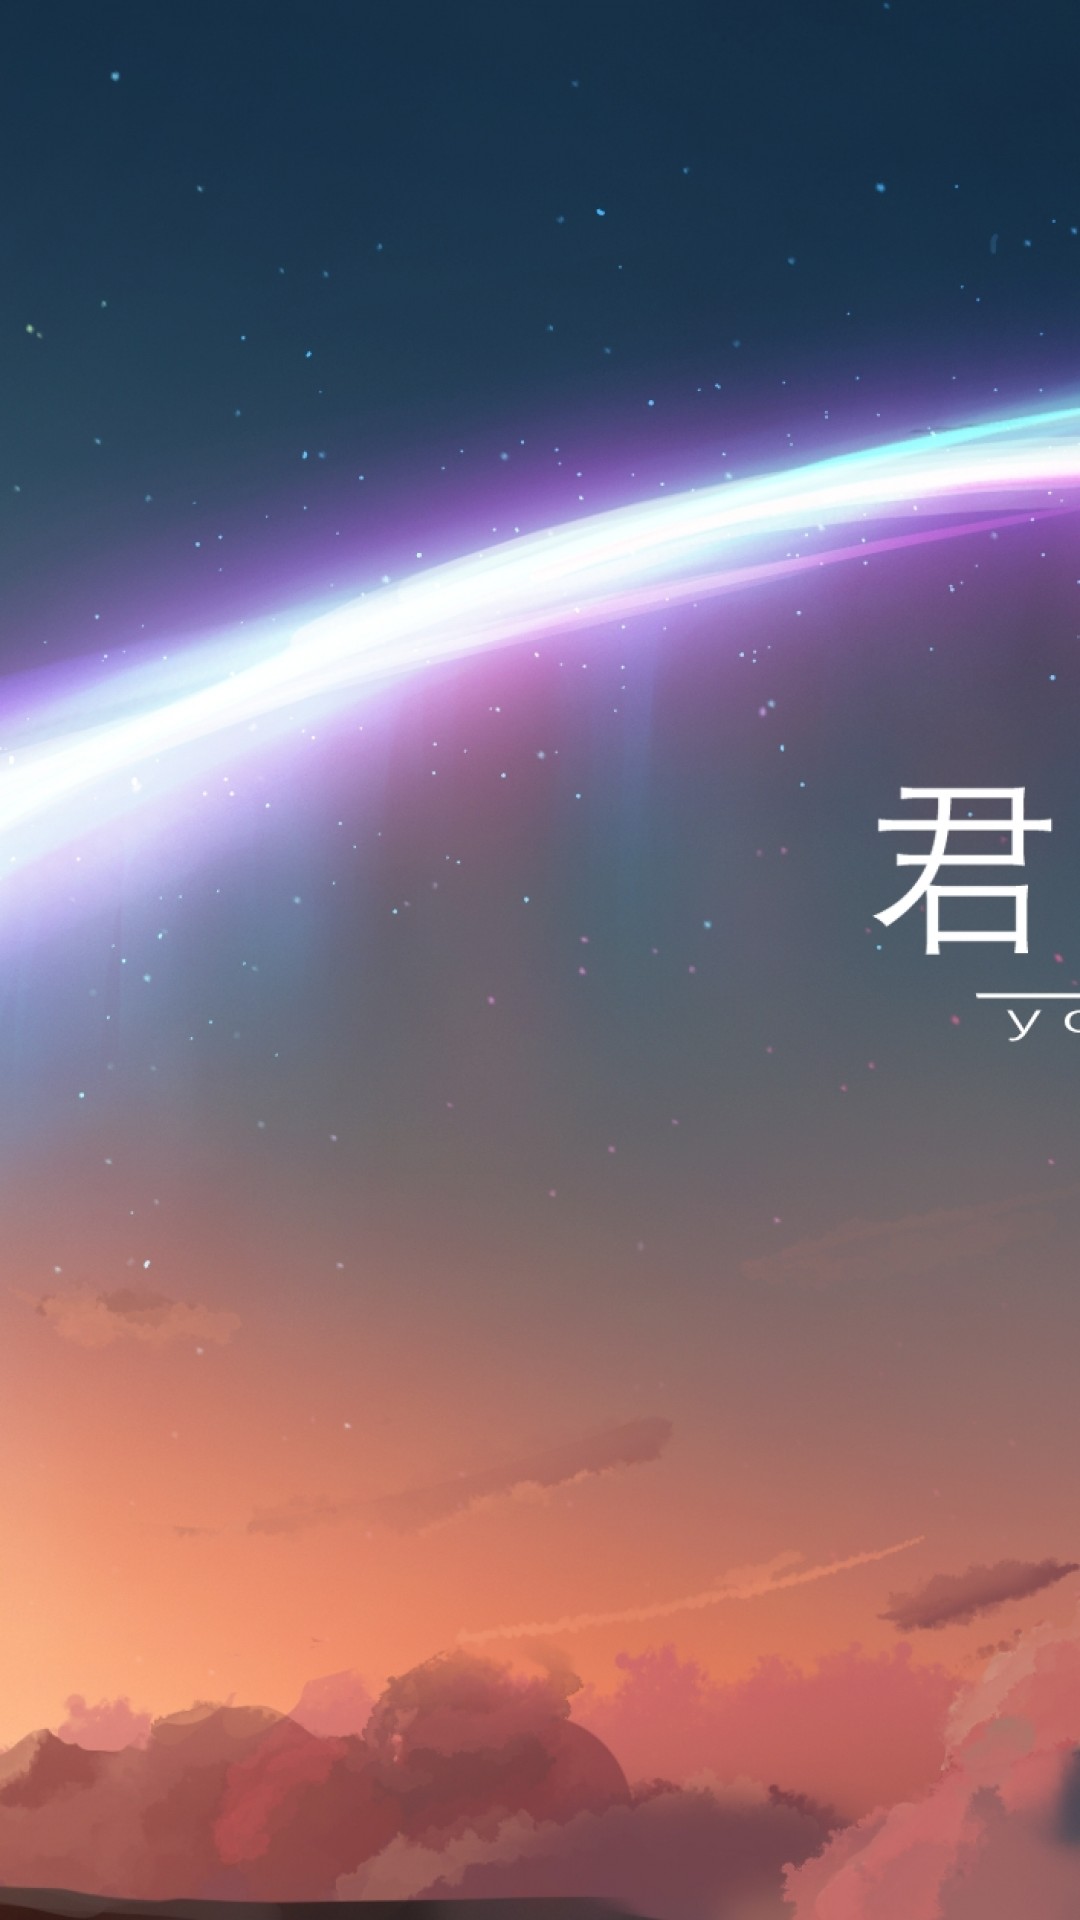 wallpaper wa,sky,atmosphere,horizon,space,outer space